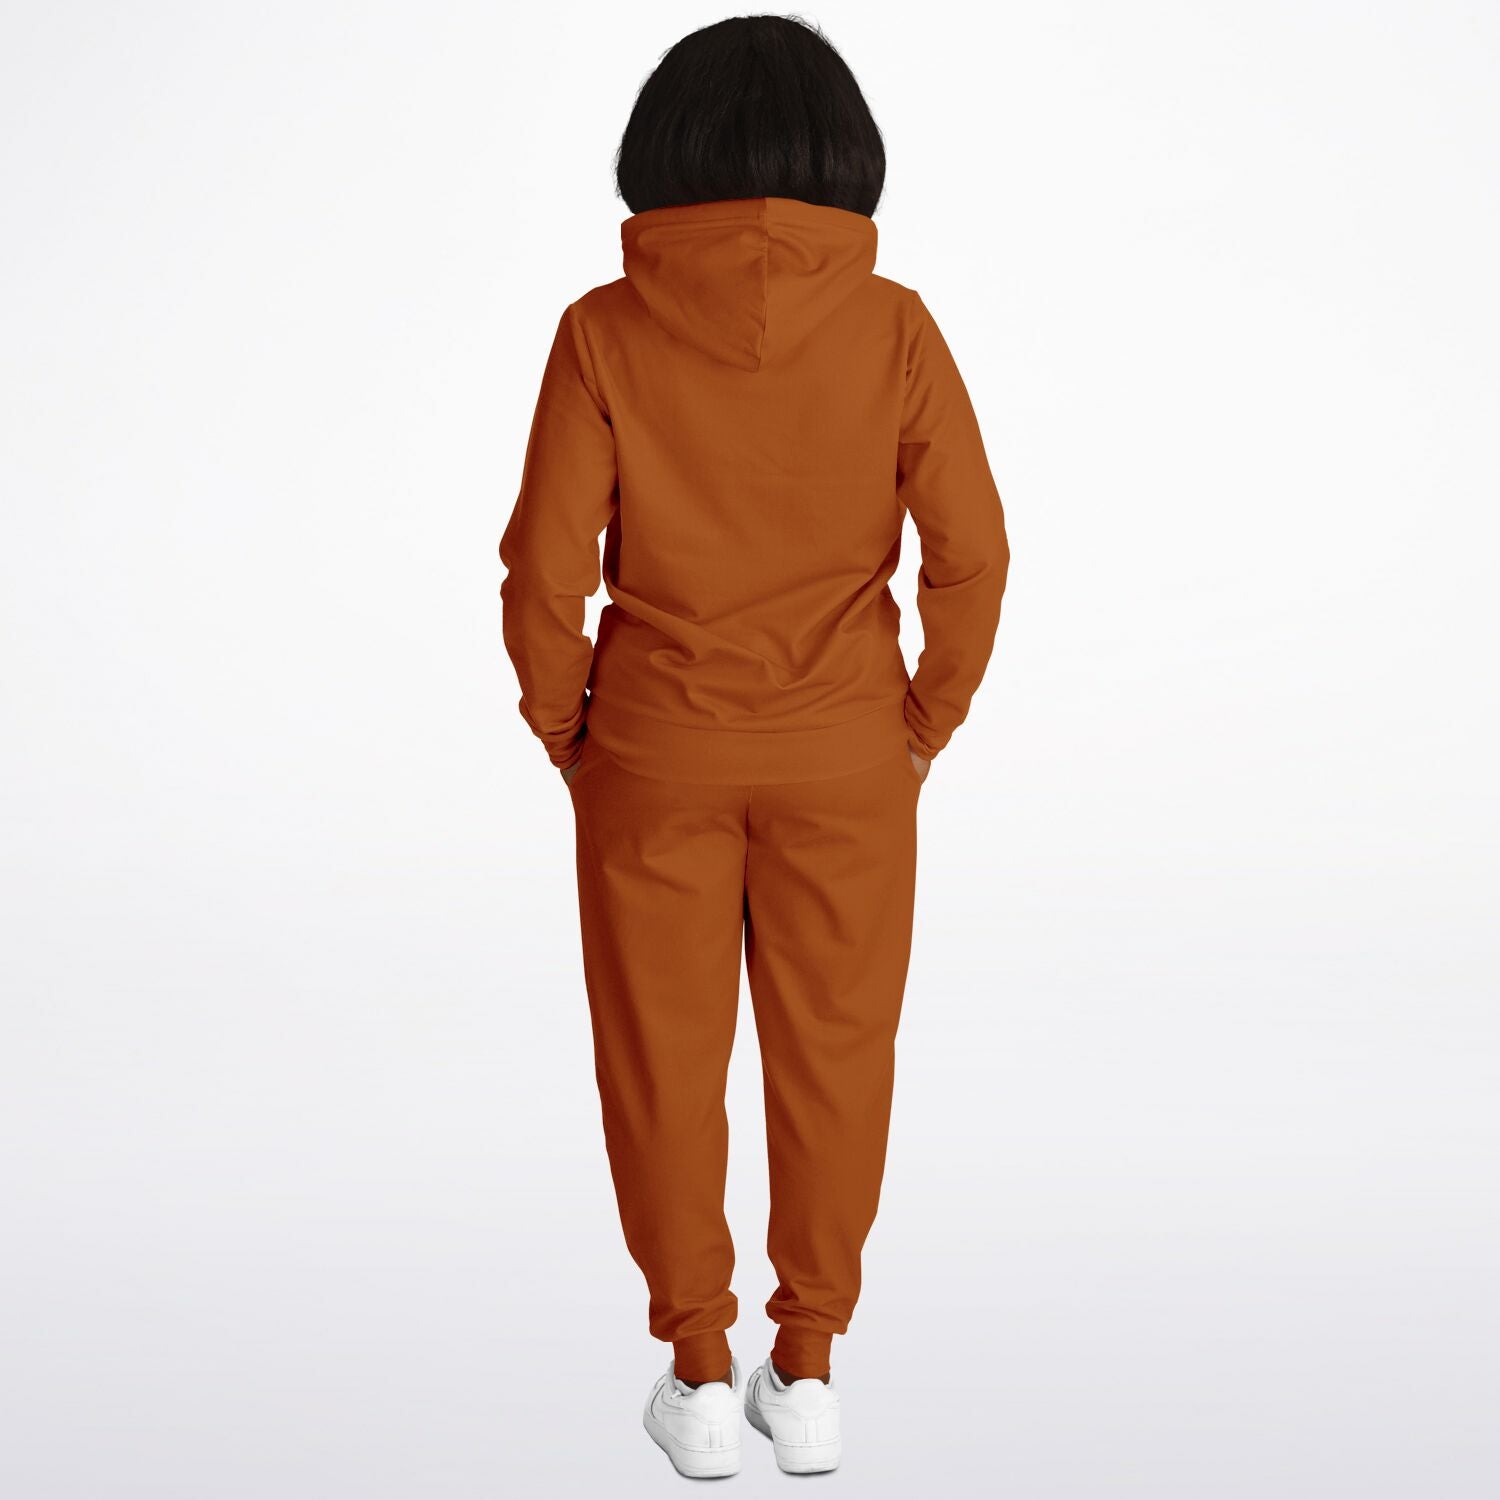 Women's Copper Hoodie and Jogger Set - Sport Finesse